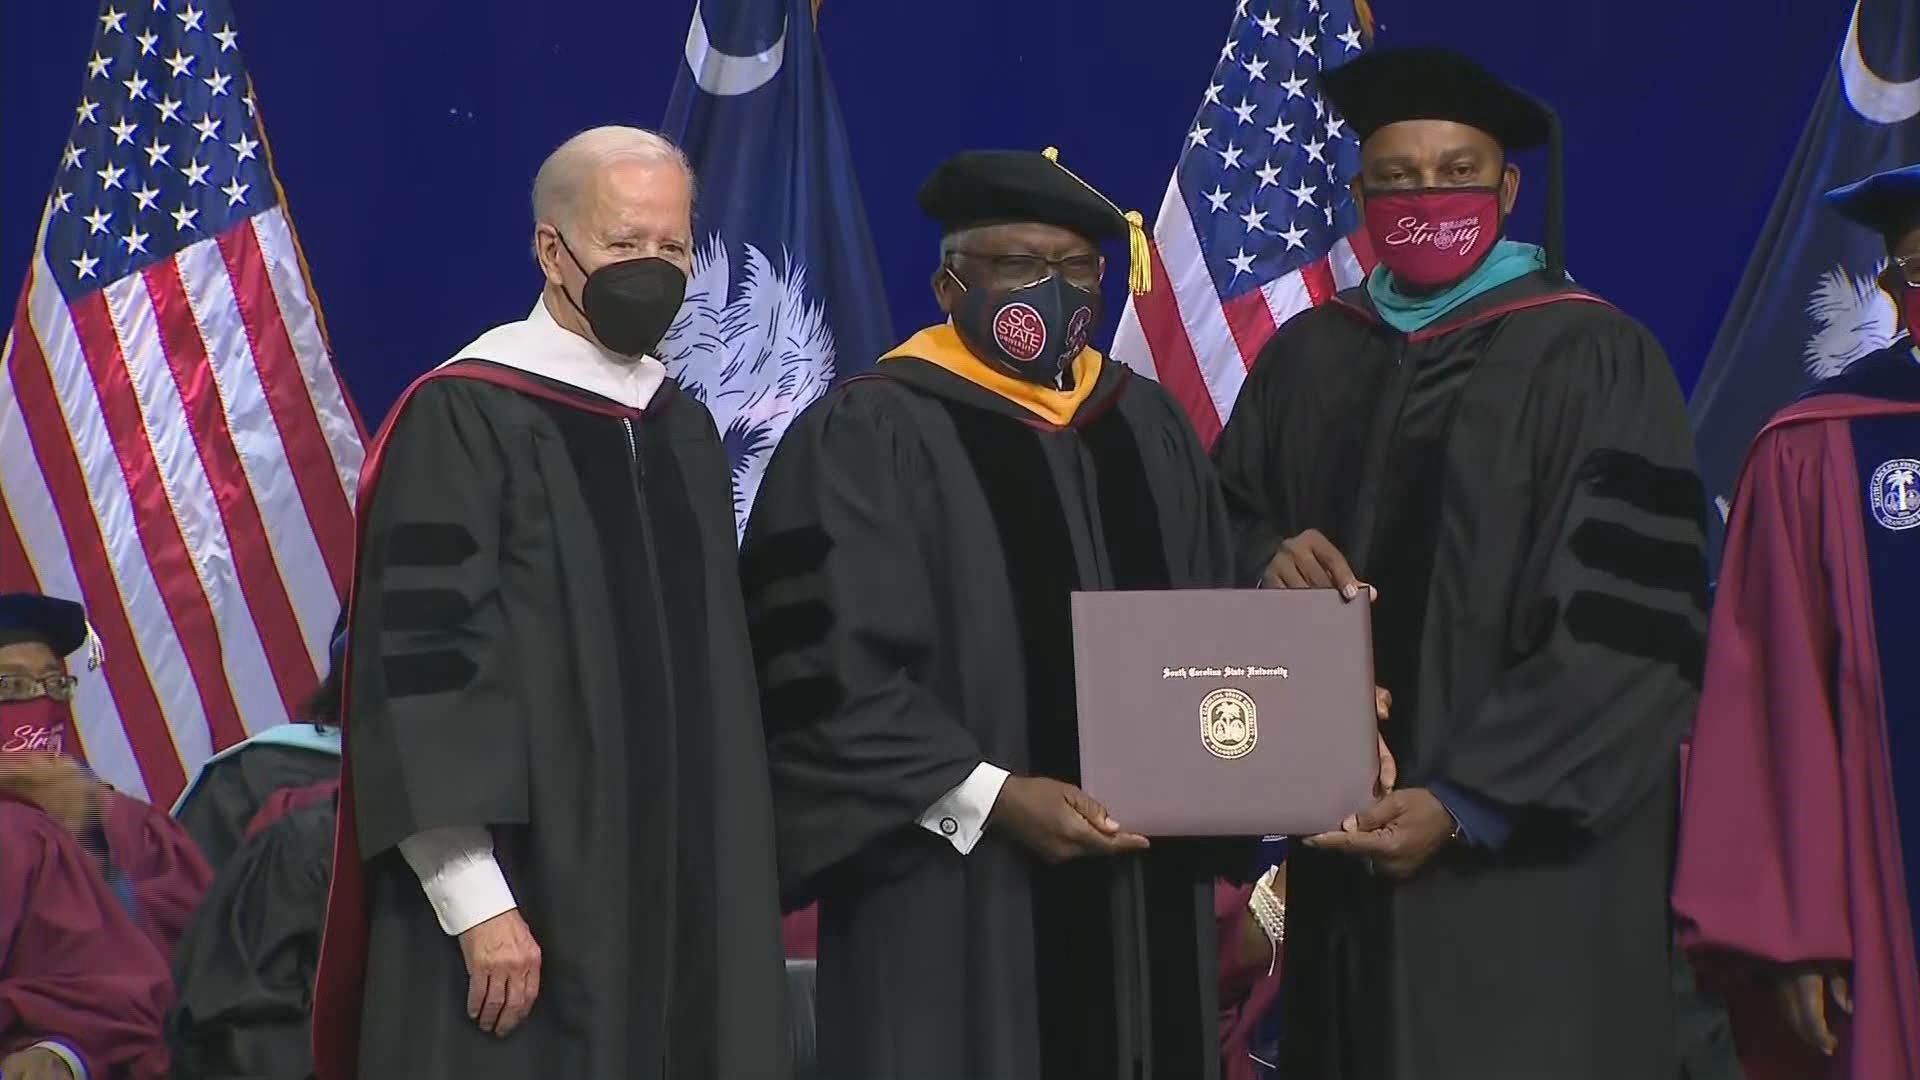 60 years after his graduation, Congressman Jim Clyburn marched with graduating seniors to officially receive his diploma.